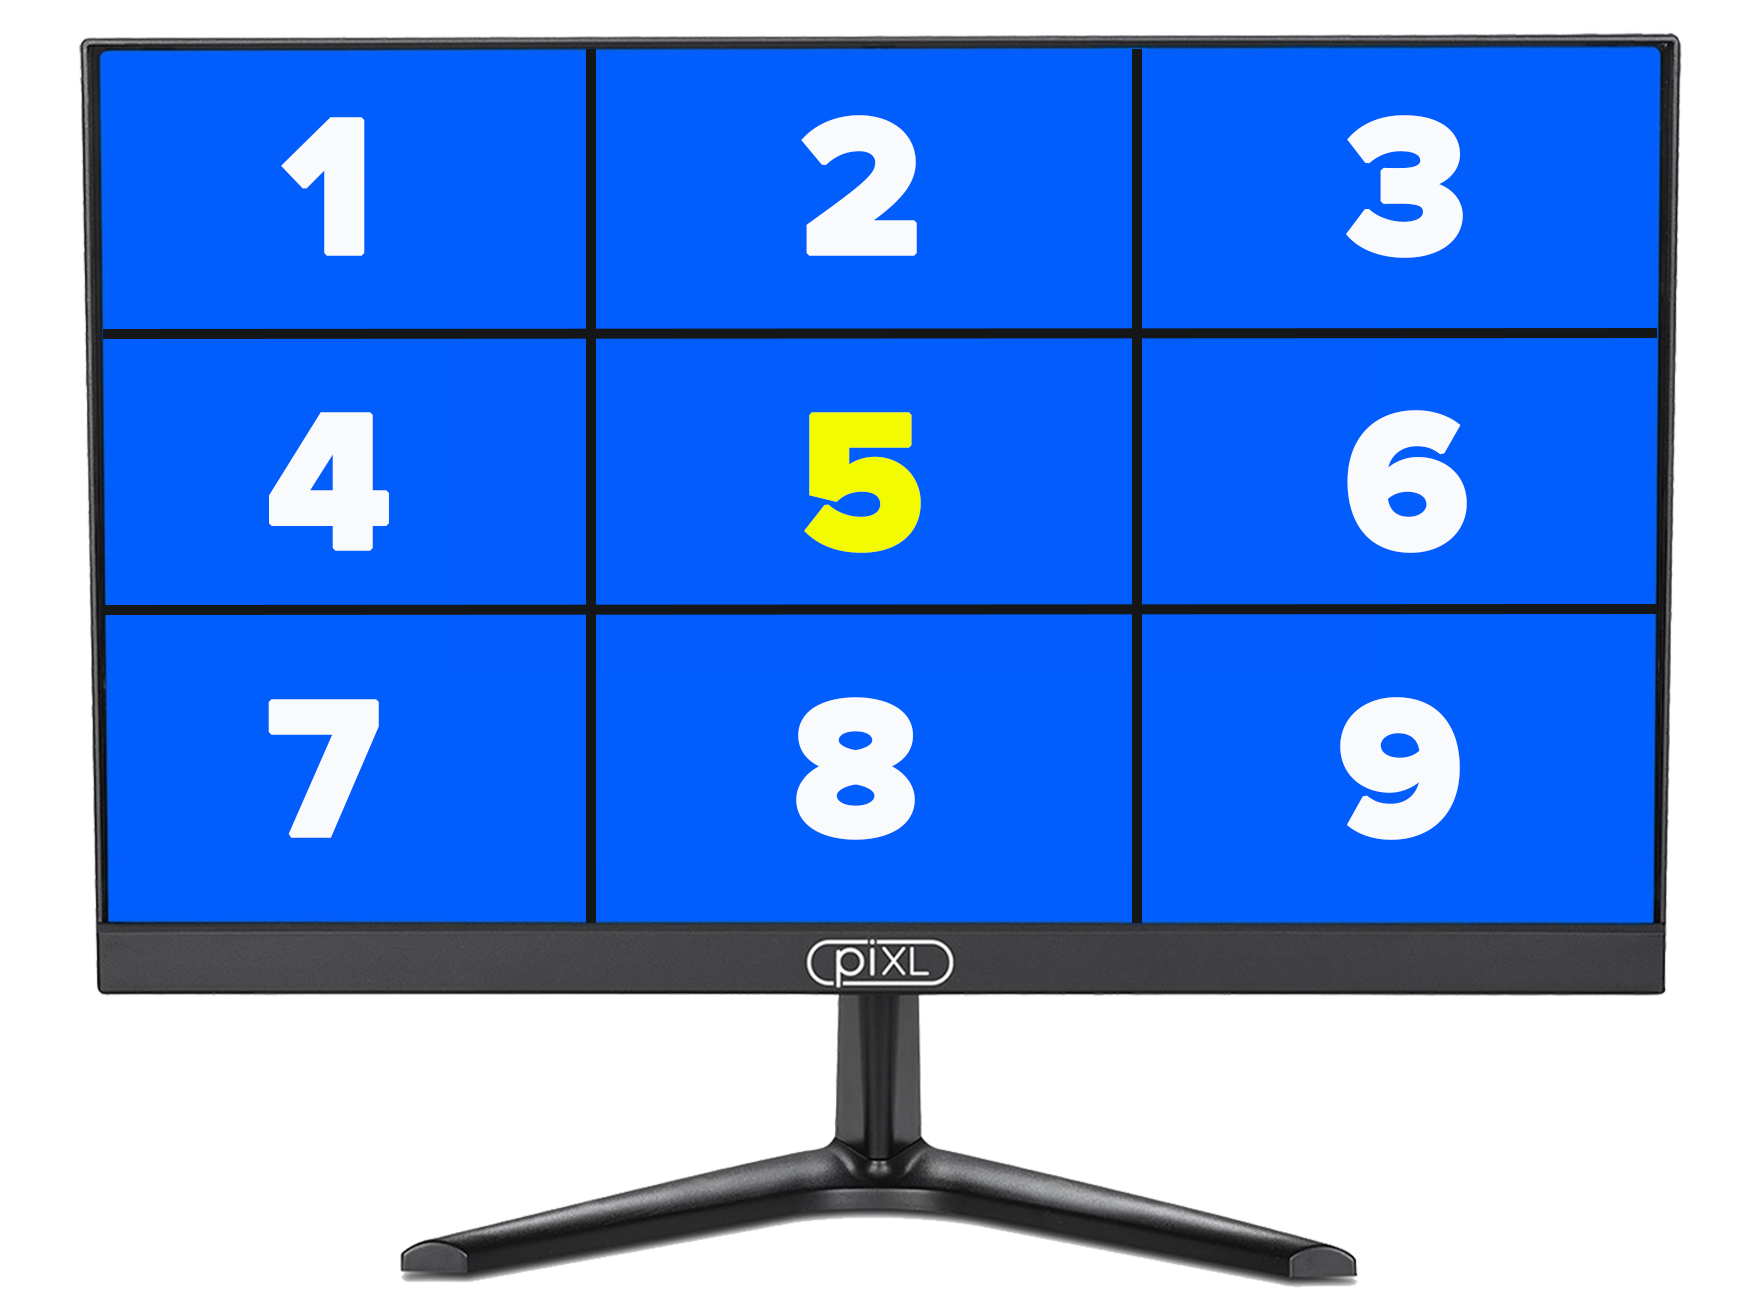 Monitor Example